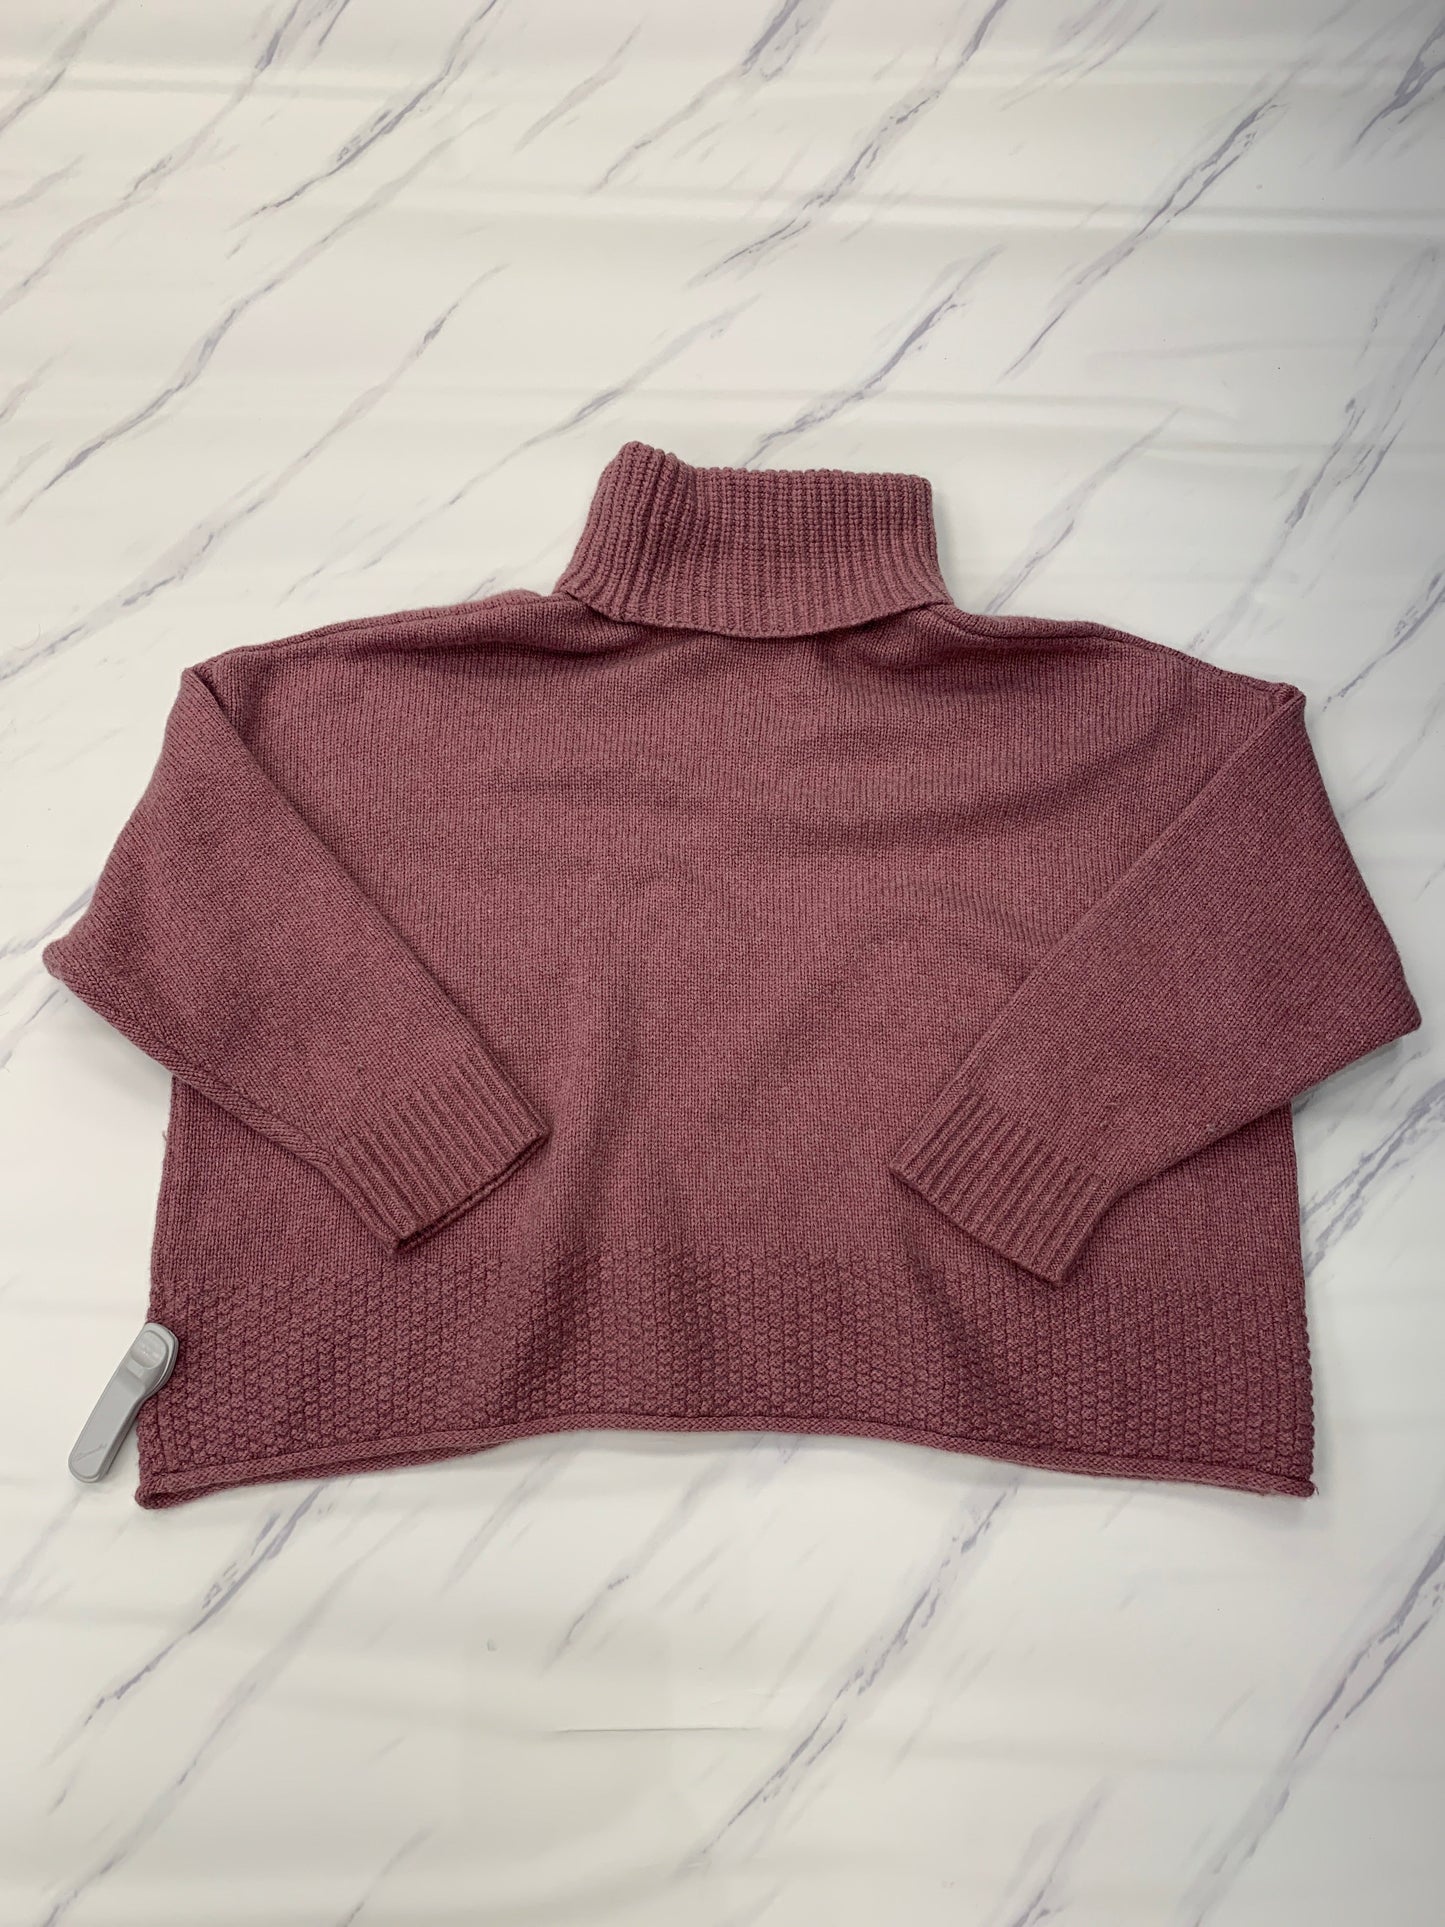 Sweater By Madewell  Size: 3x